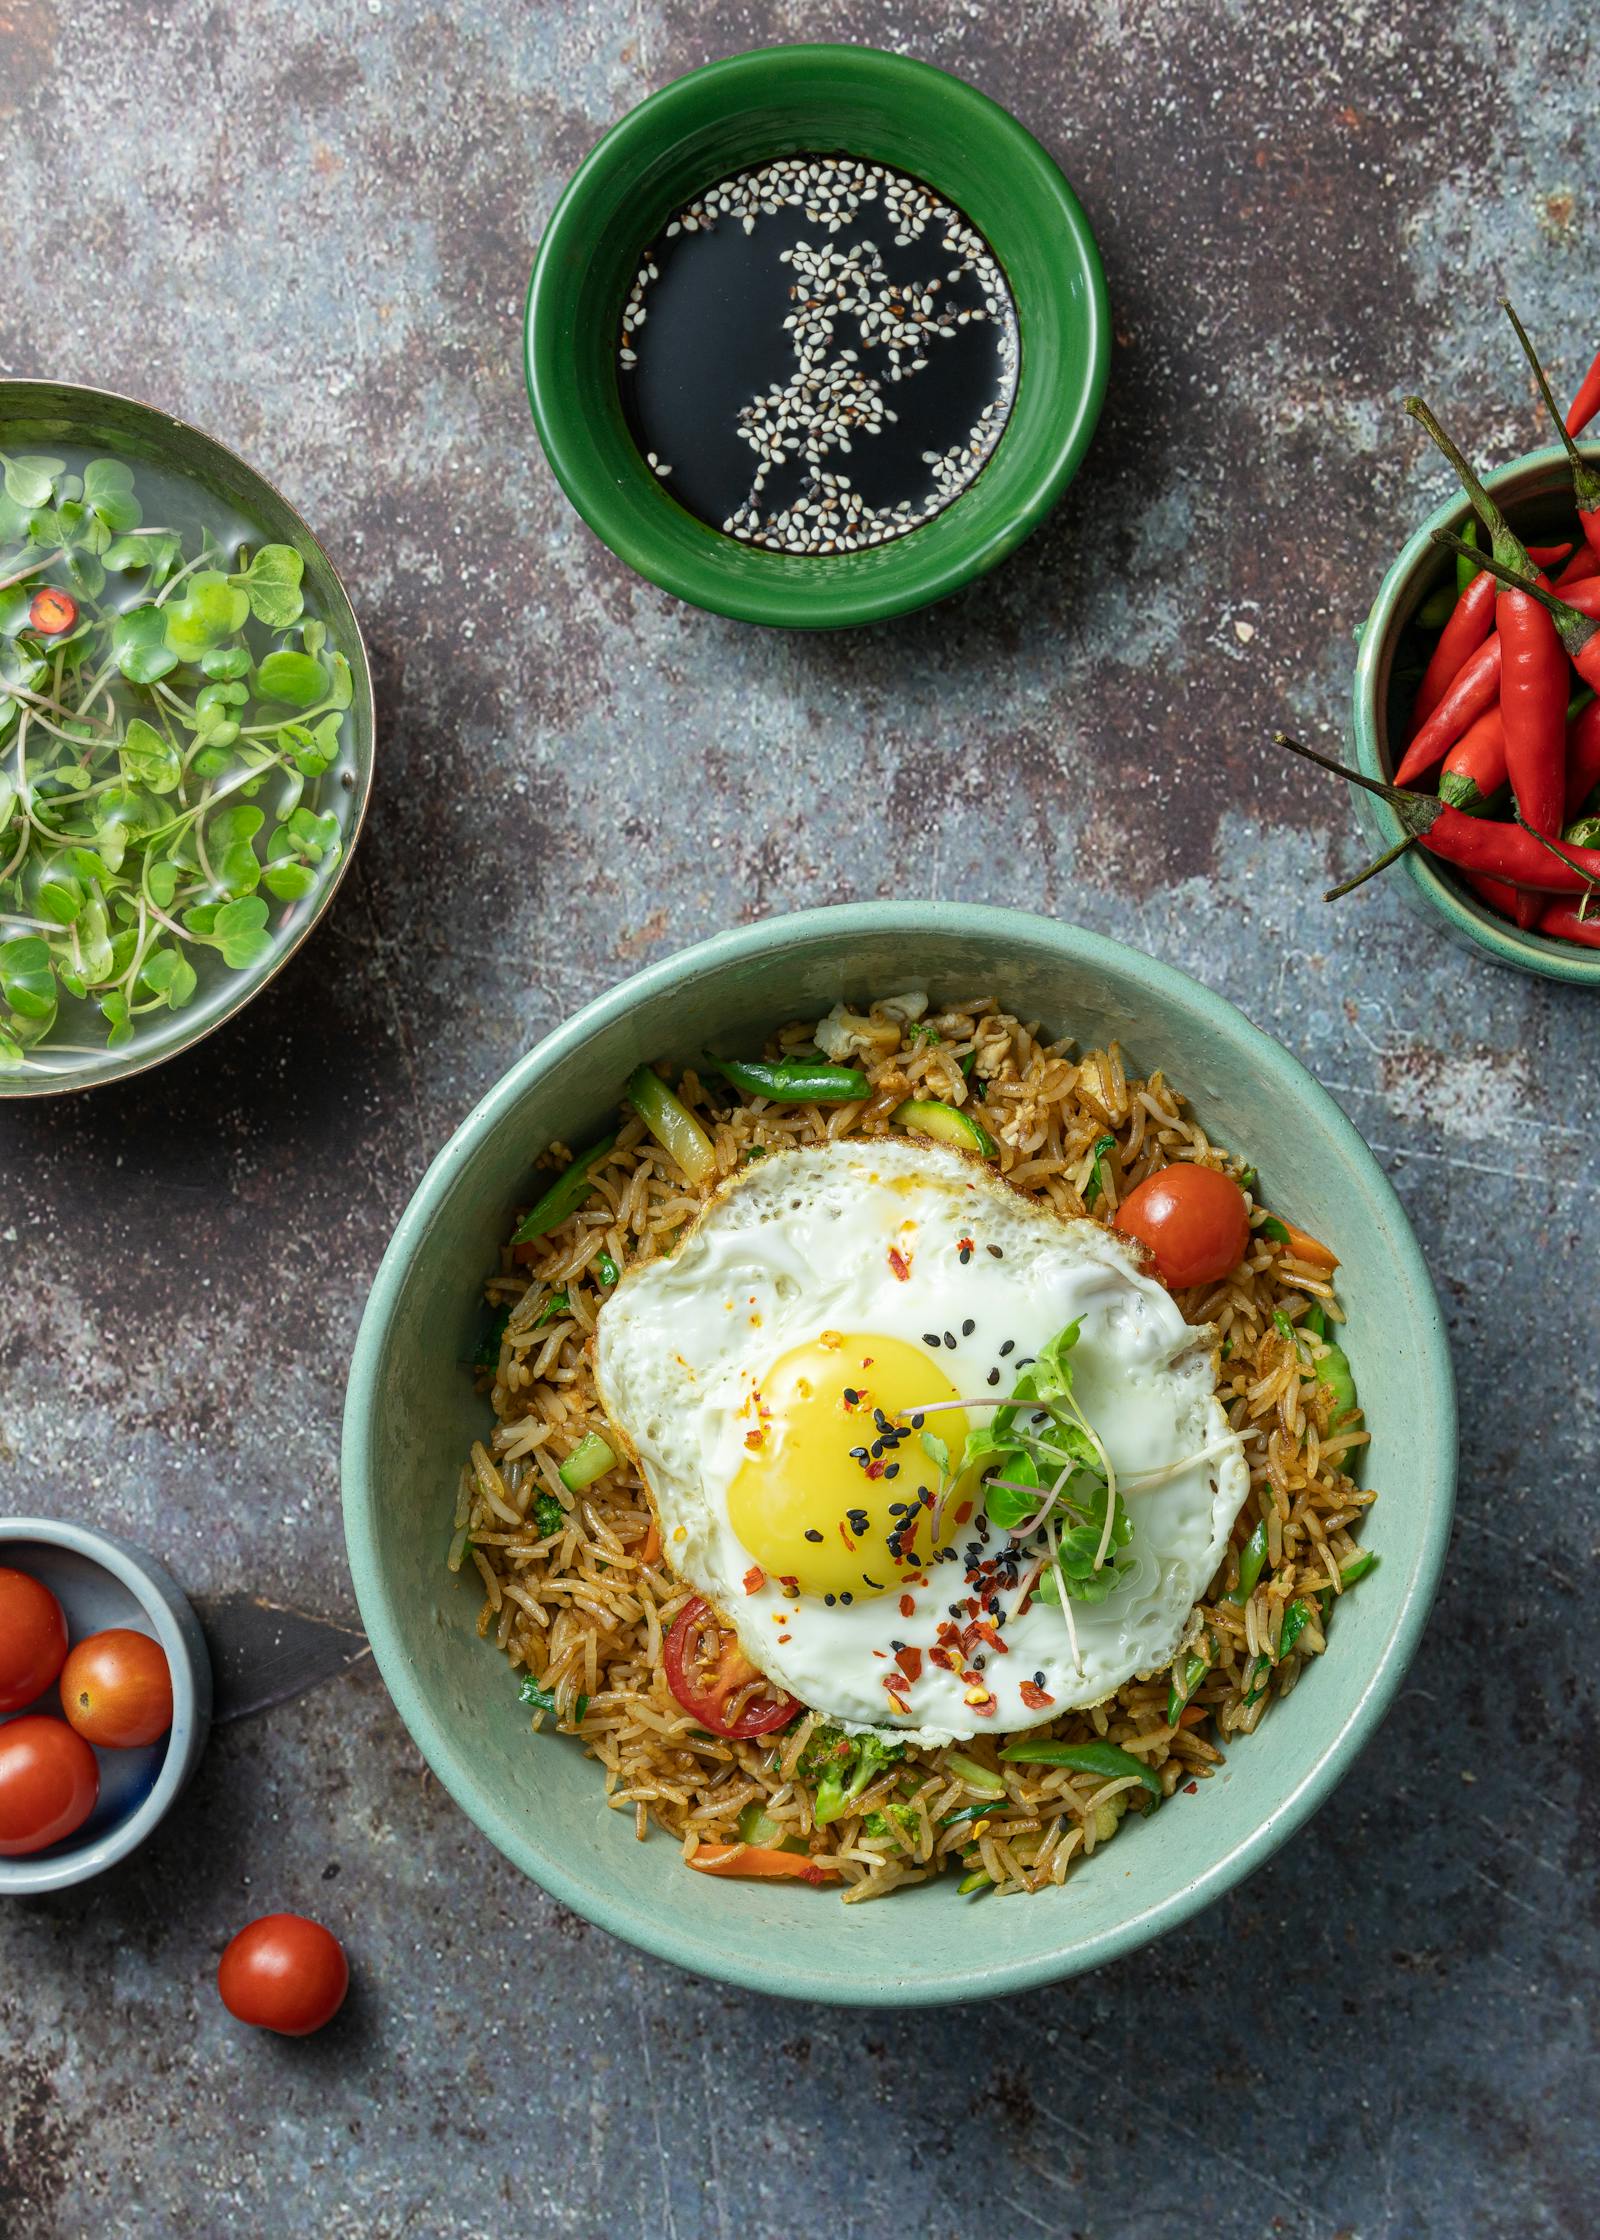 Make an easy and delicious Fried Rice! Simply-recipes tells you how to make this dish full of mixed vegetables, eggs, and soy sauce in just a few steps!